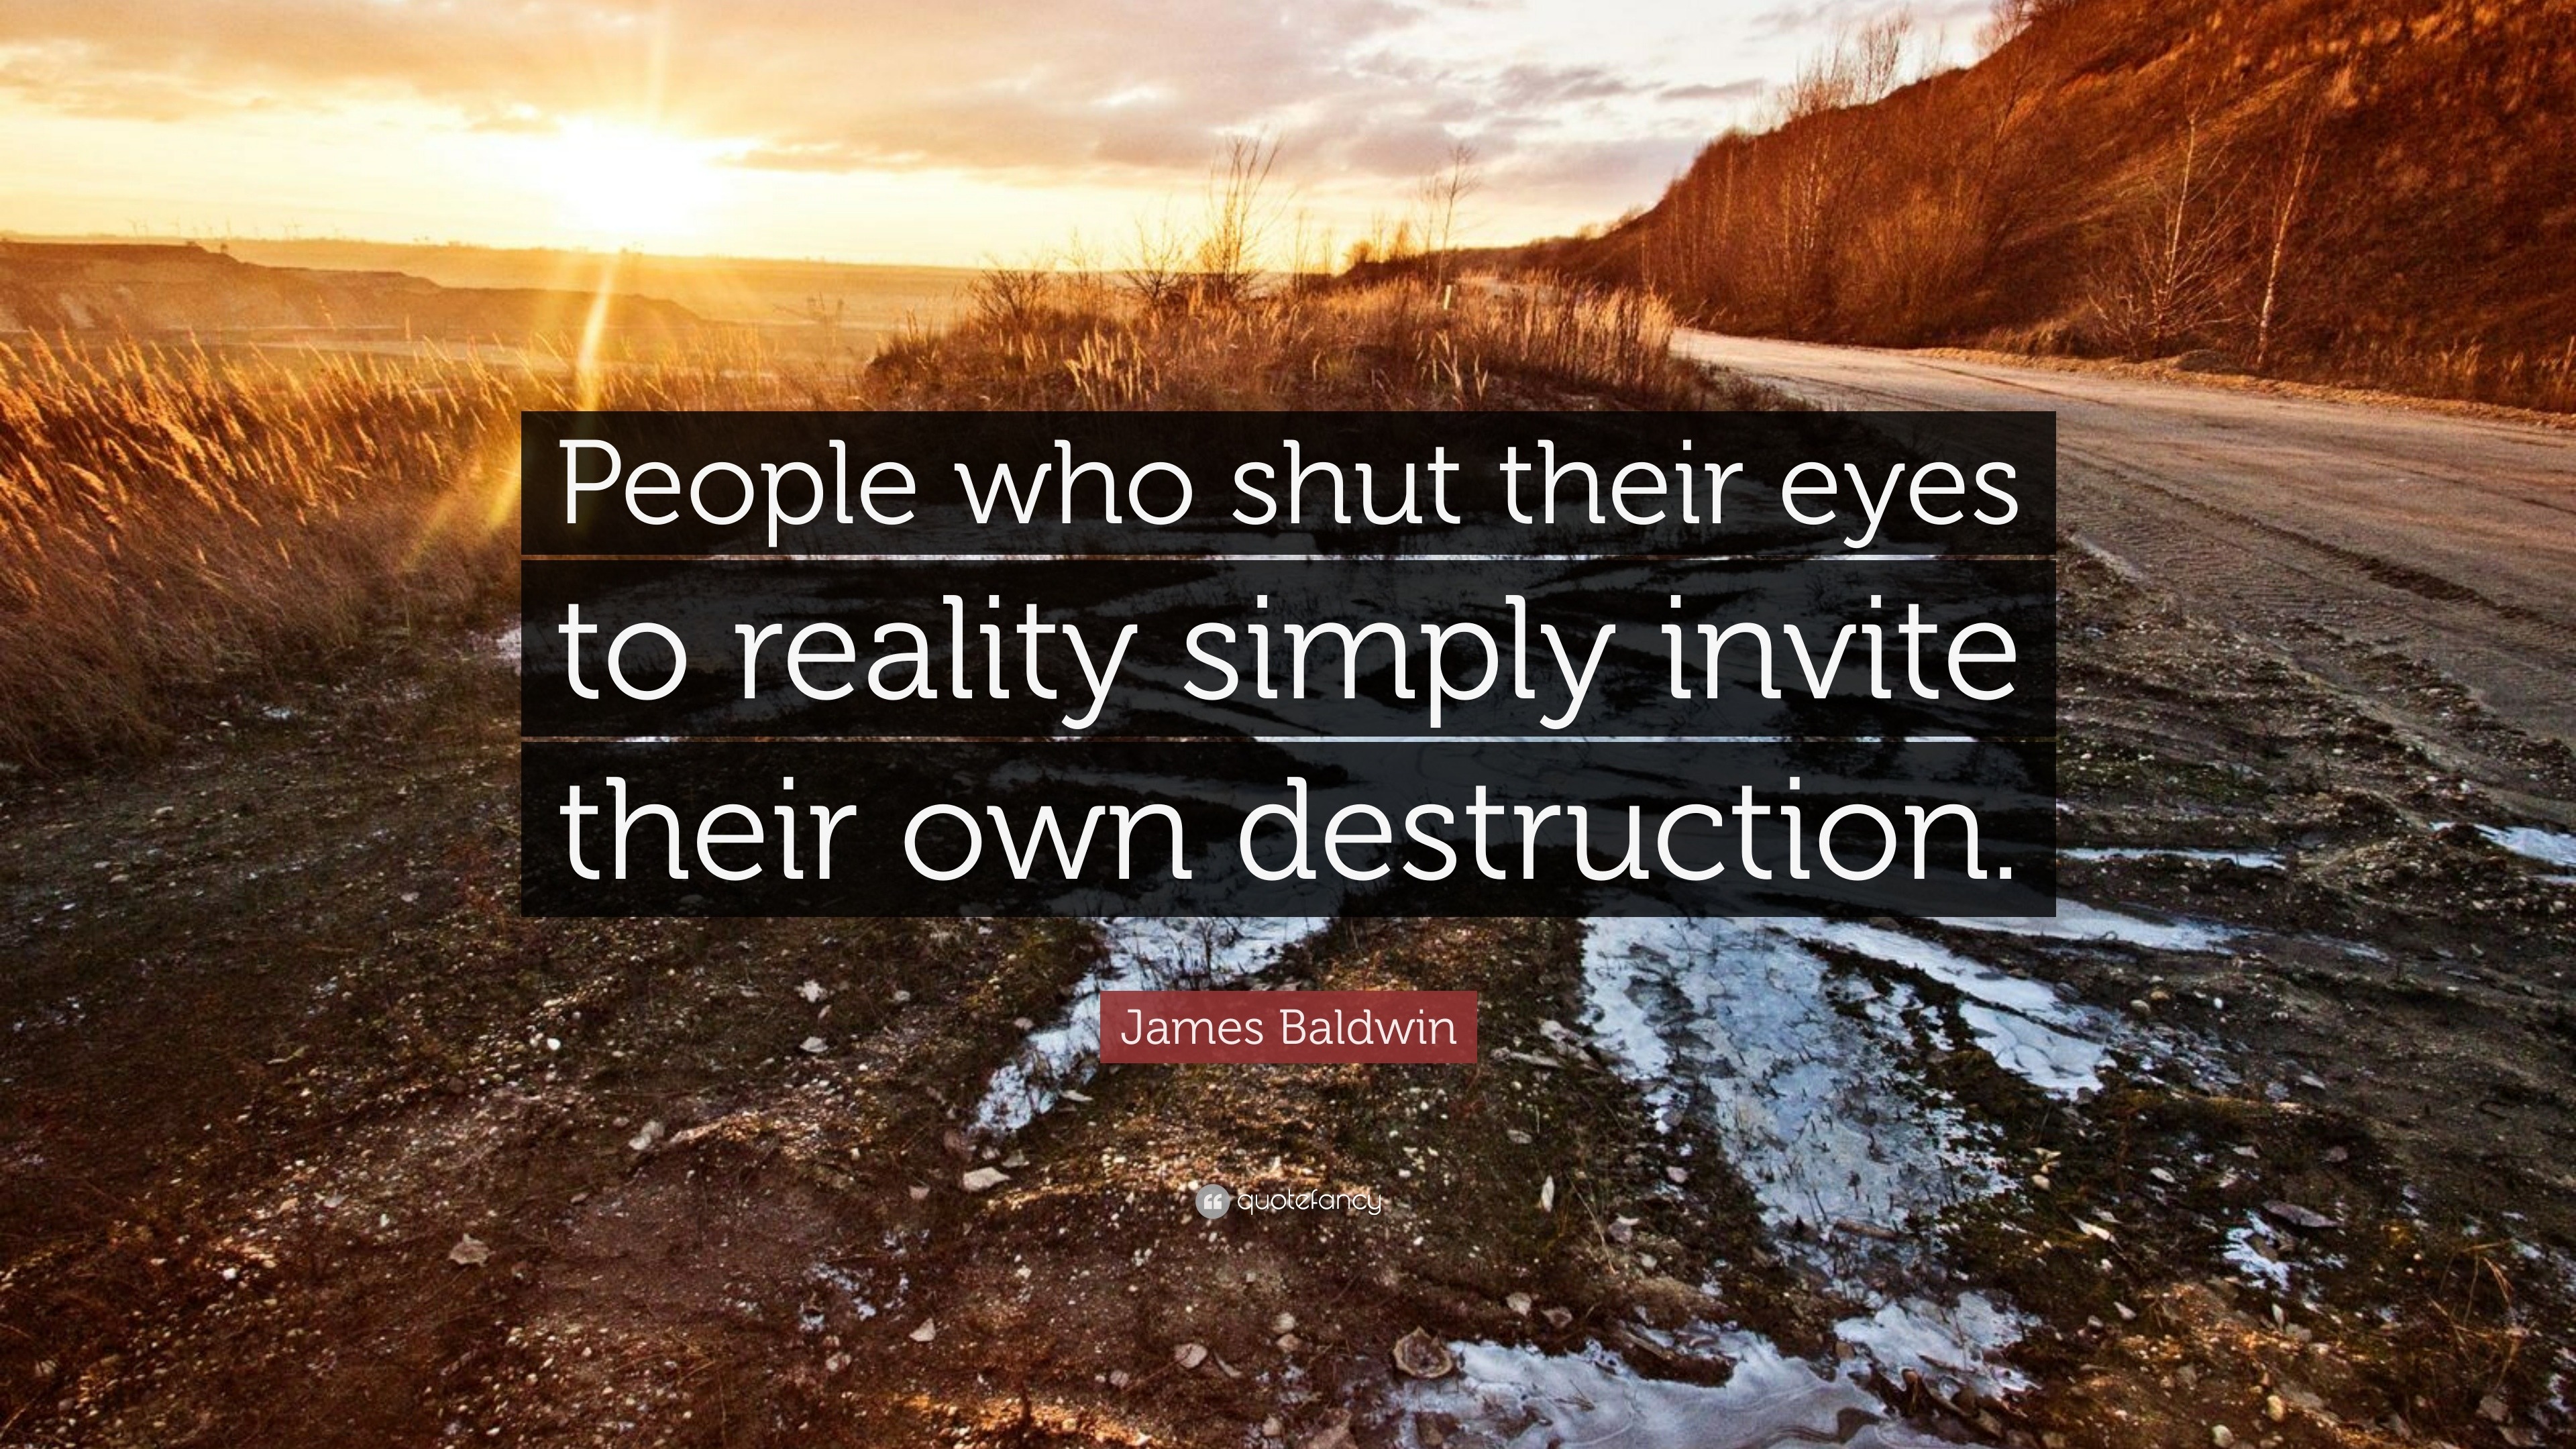 James Baldwin Quote: “People who shut their eyes to reality simply invite their  own destruction.”